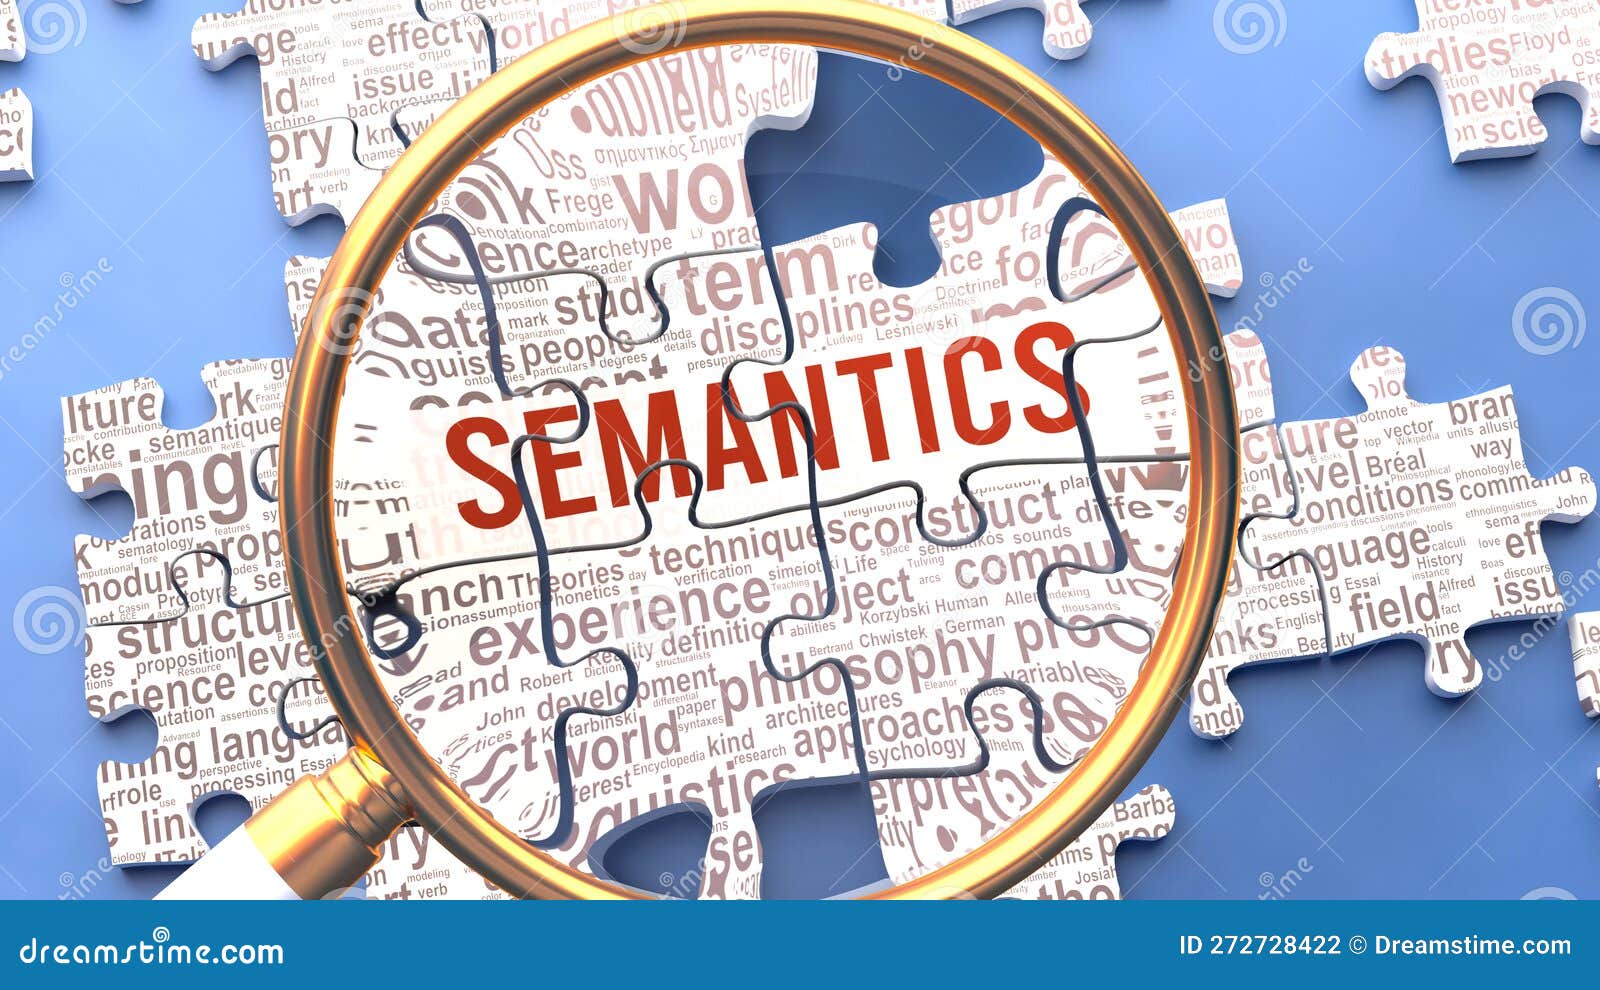 semantics being closely examined